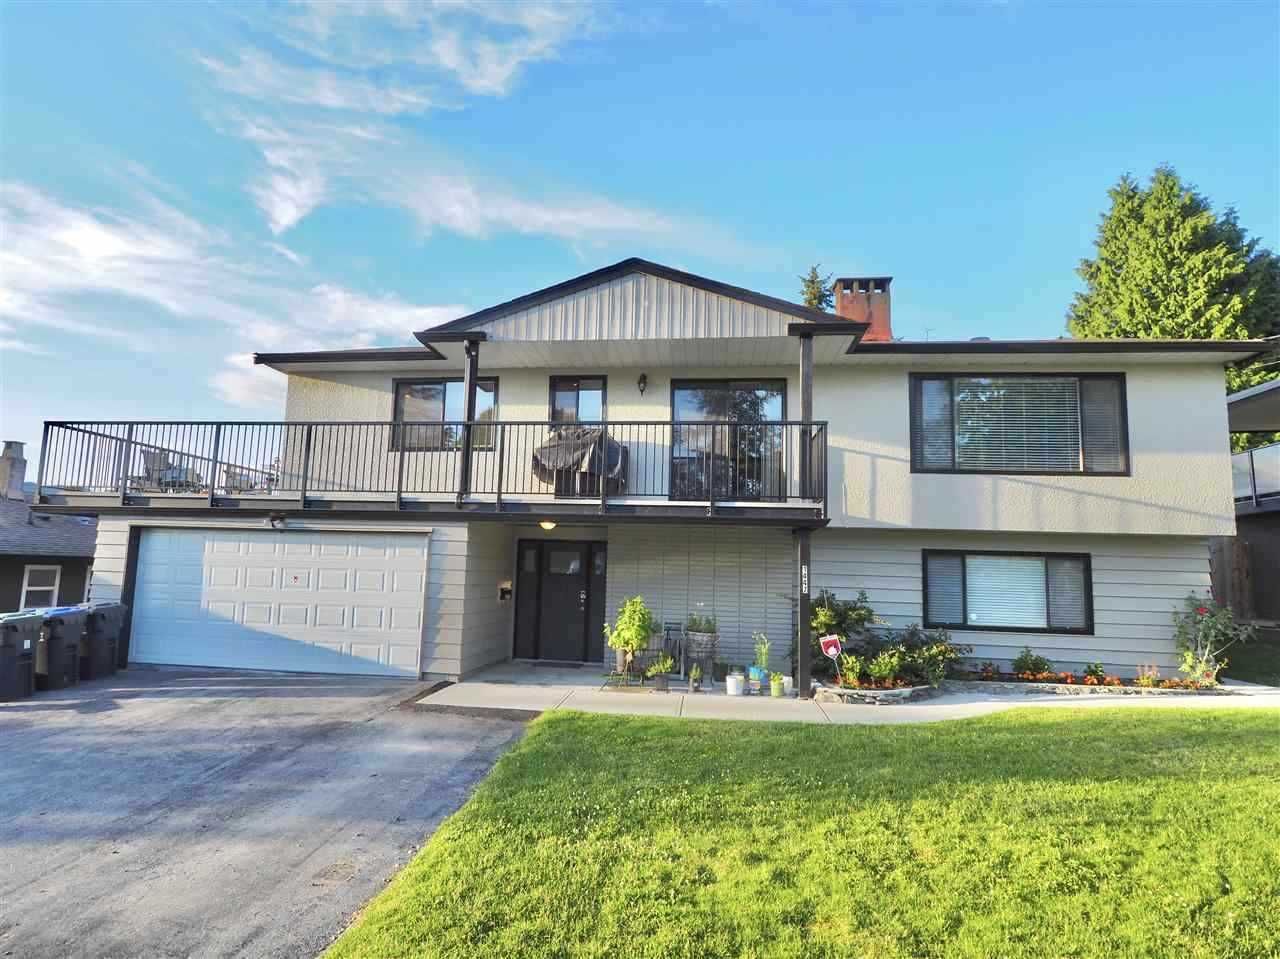 Main Photo: 1447 GLORIA DRIVE in : Mary Hill House for sale (Port Coquitlam)  : MLS®# R2322951